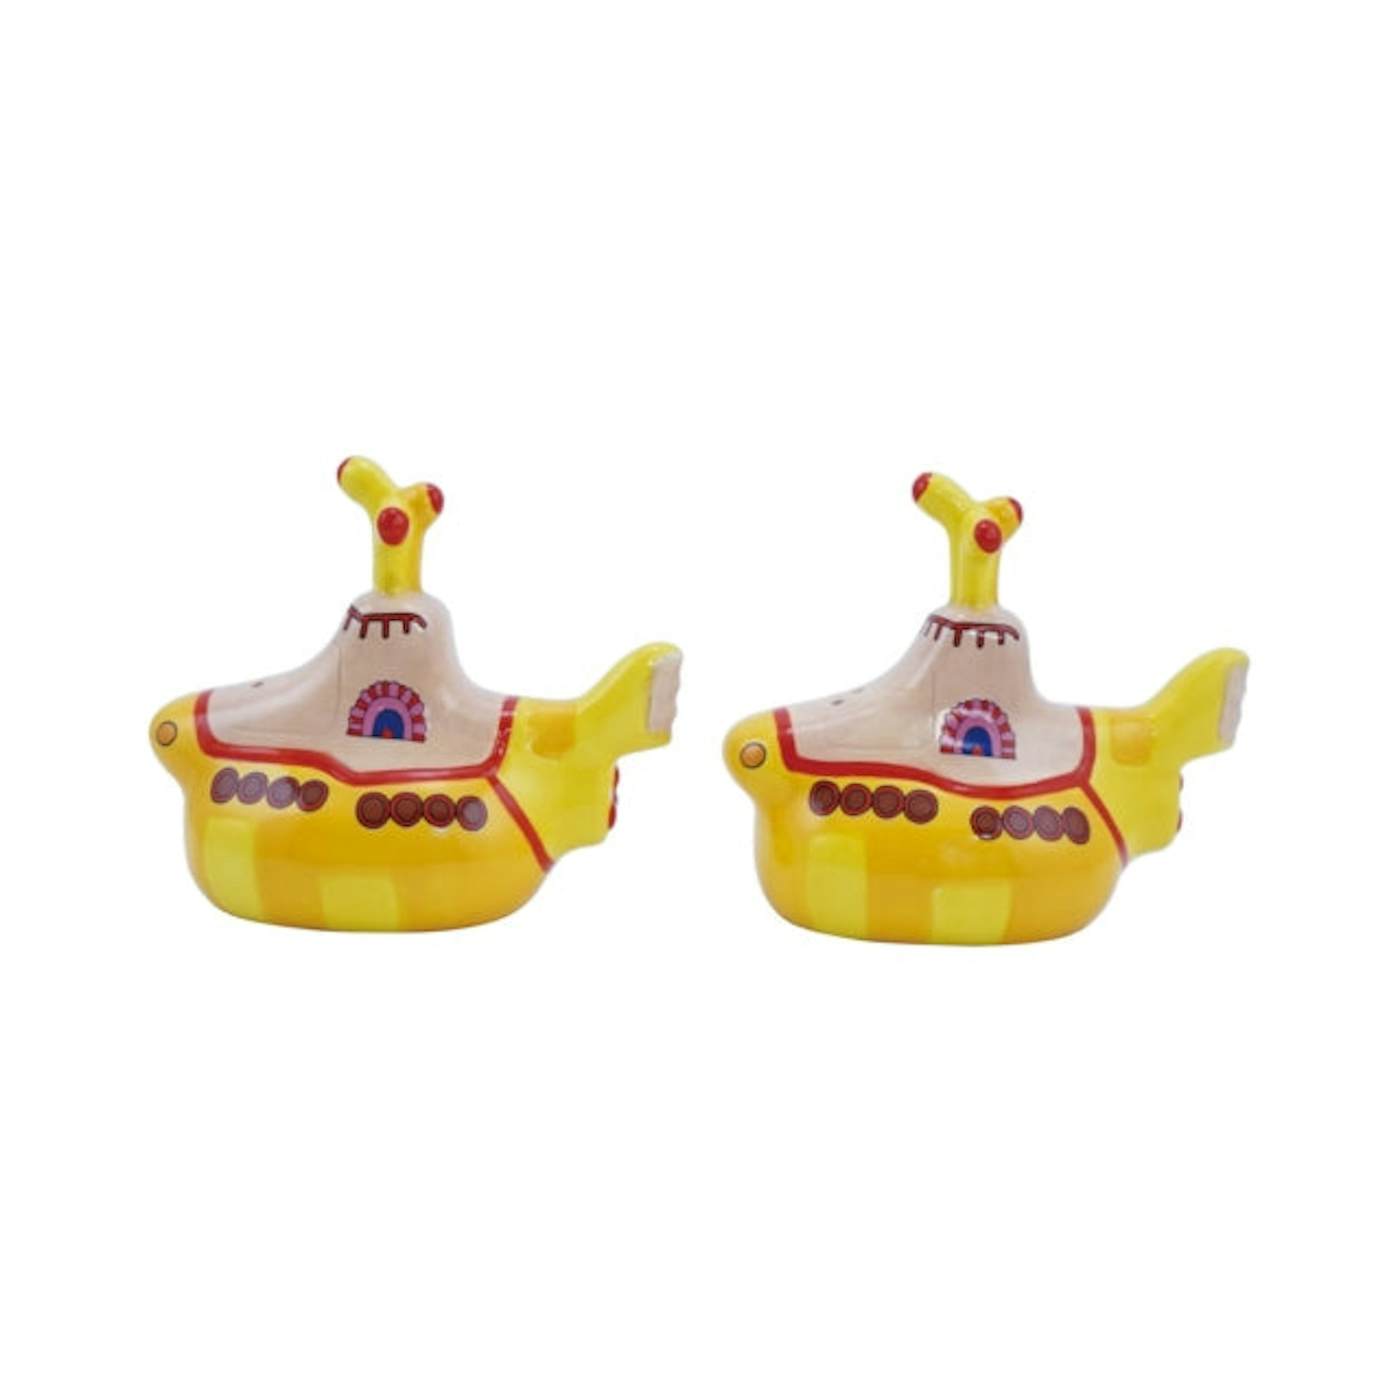 The Beatles Salt & Pepper Shakers - Salt and Pepper Shakers Boxed - (Yellow Sub.)